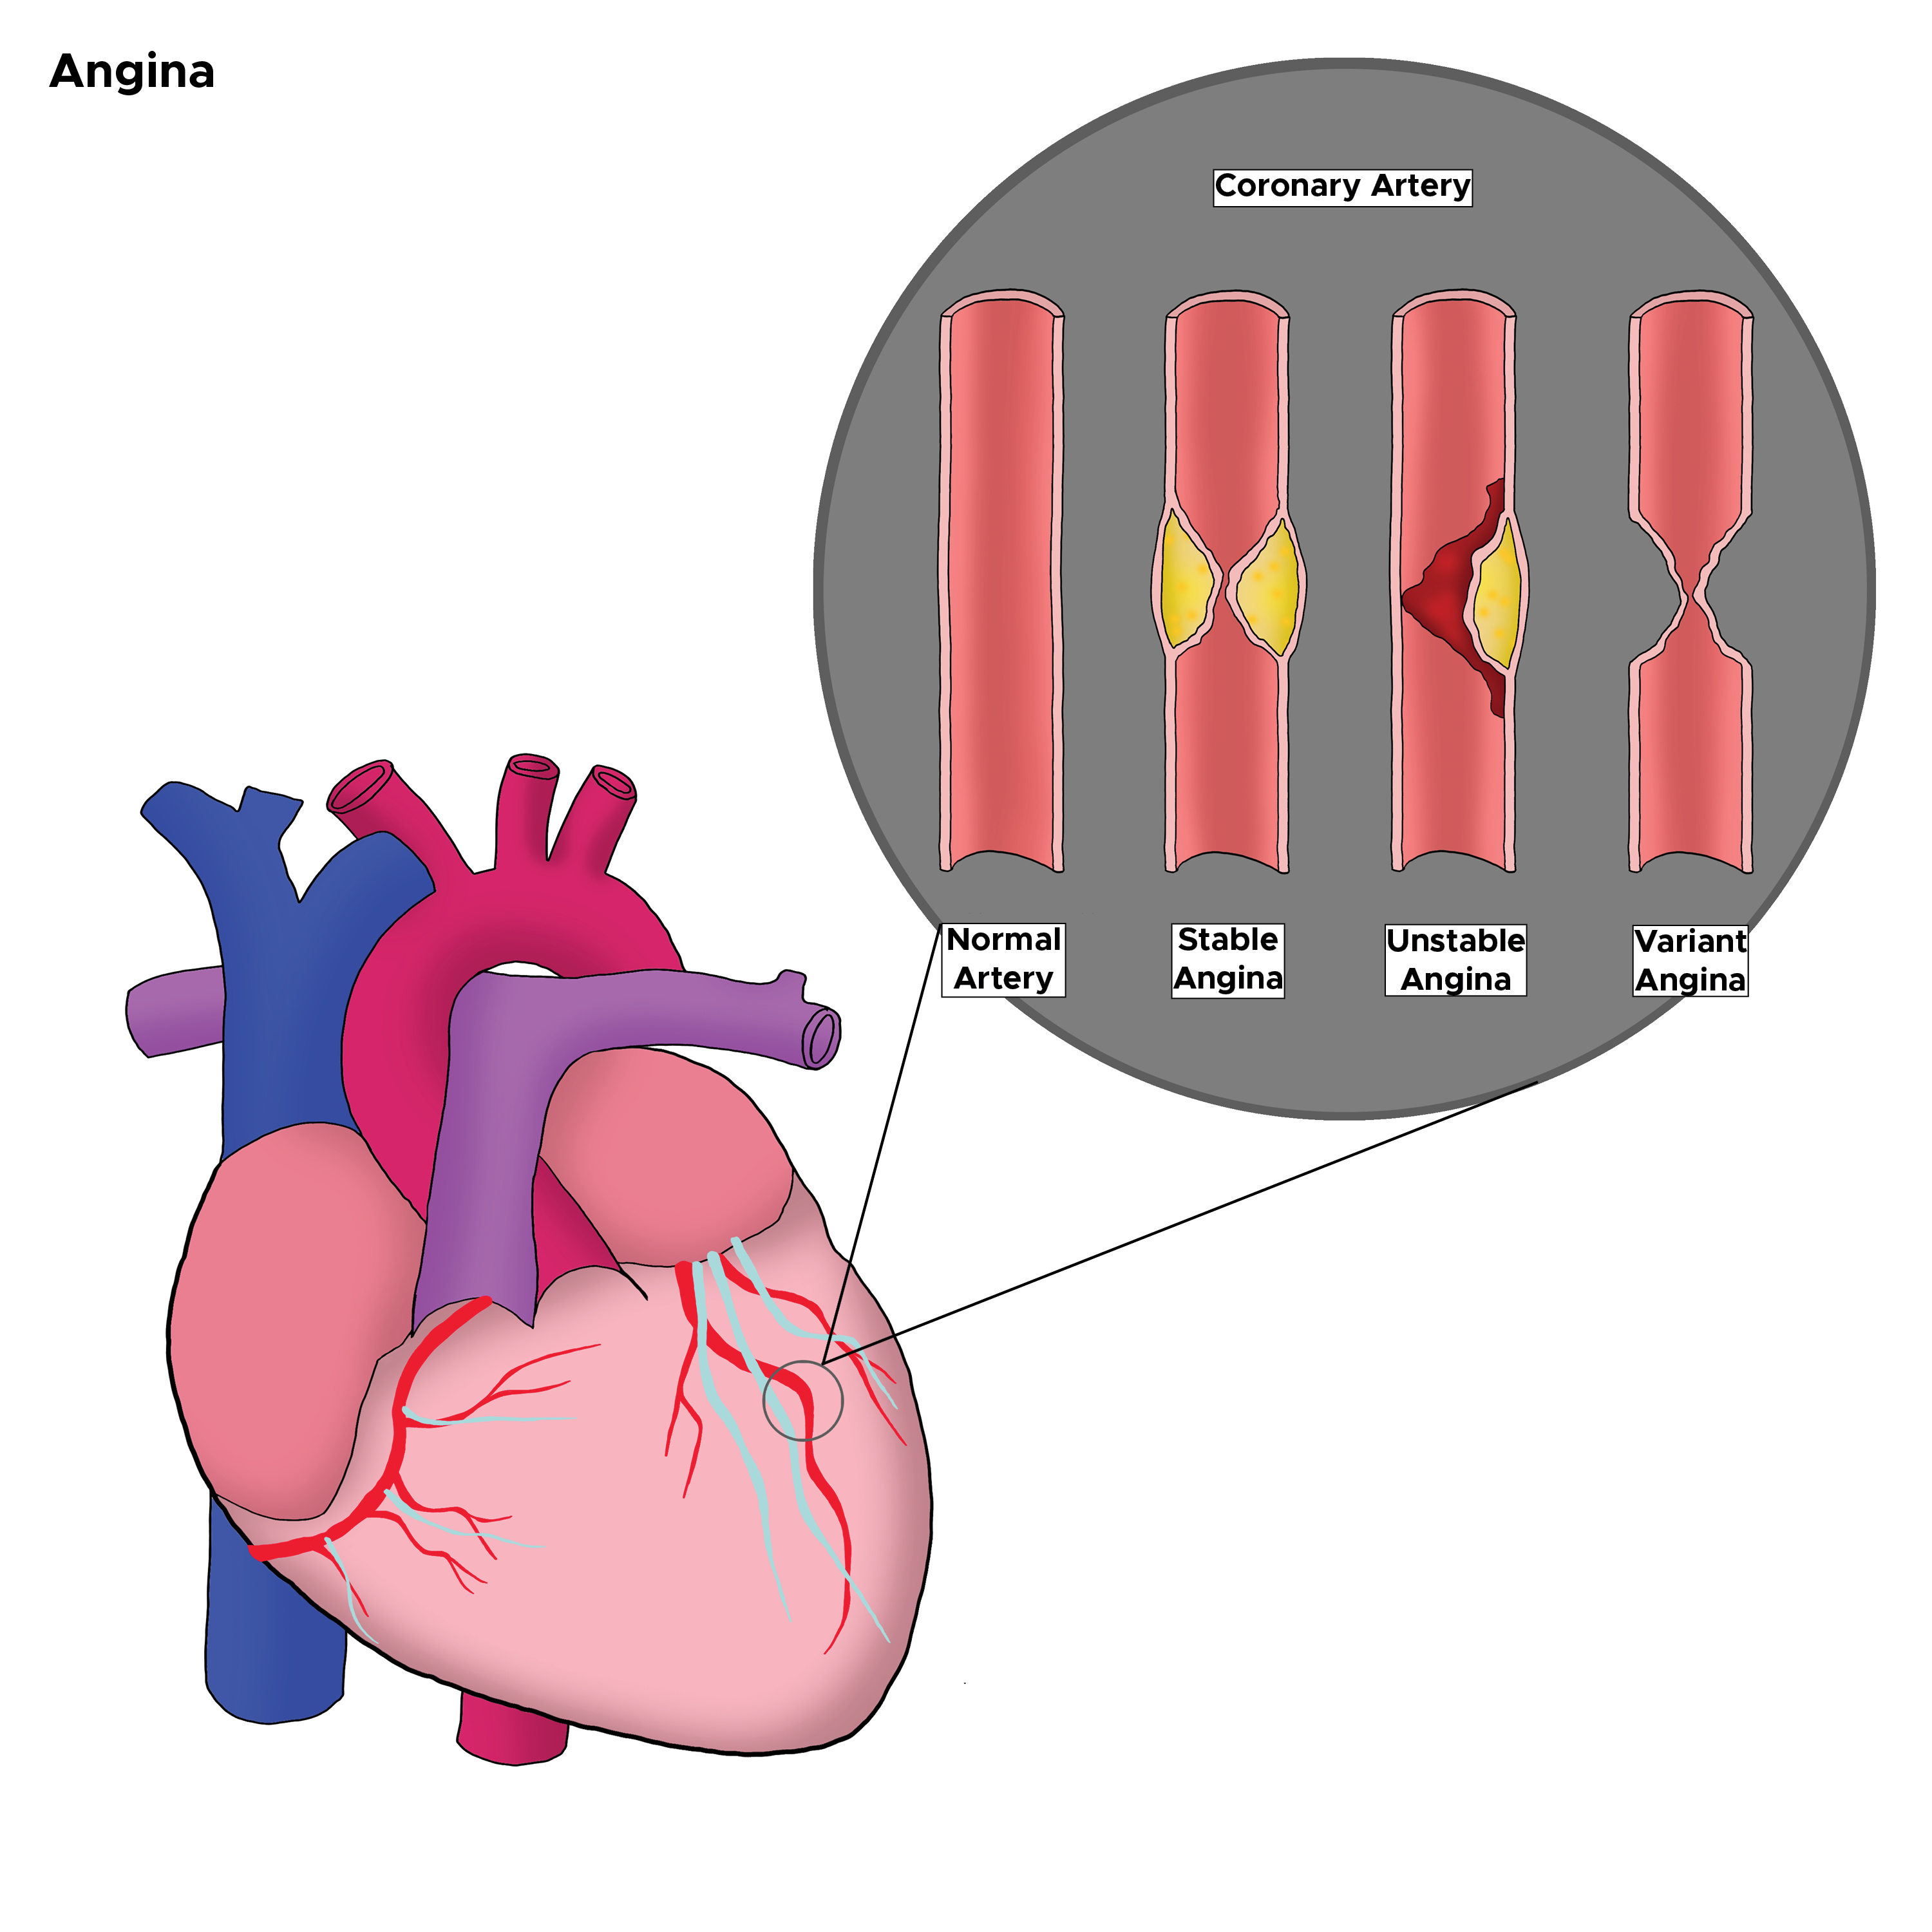 Different types of angina in the coronary artery. Stable angina, unstable angina, variant angina.